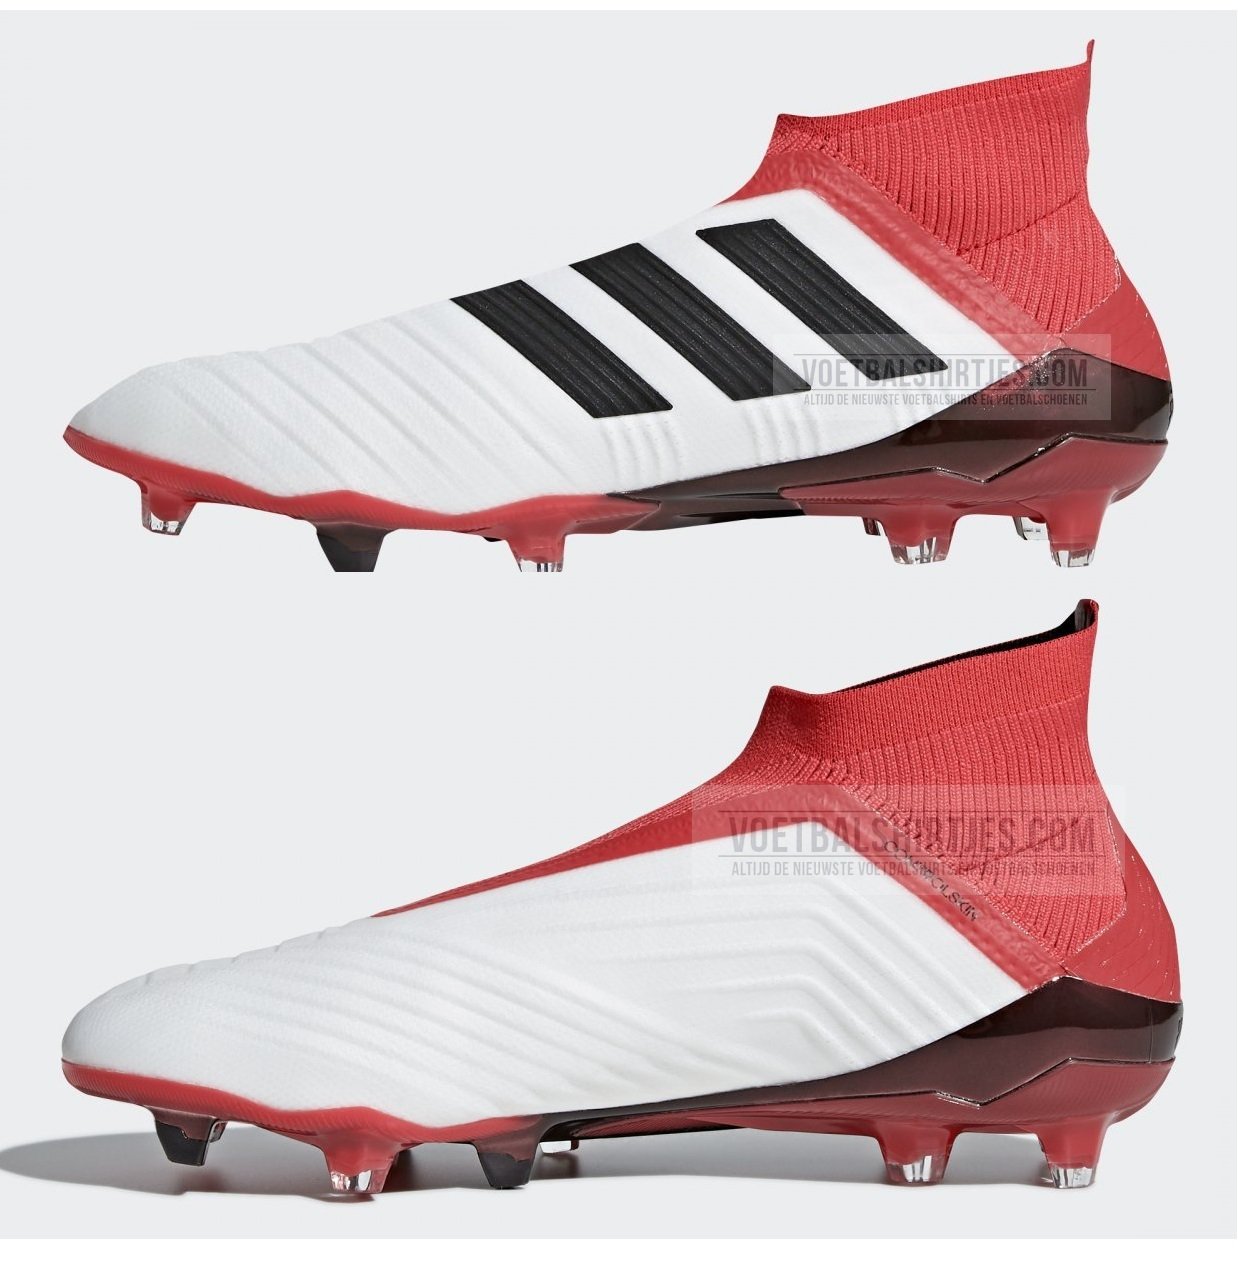 voetbalshirts on Twitter: "Adidas Predator 18+ Cold Blooded white / red cleats 2018 https://t.co/W4pglamfBk #predator18 #adidaspredator #adidasfootball https://t.co/95ZIWJOI1O" /